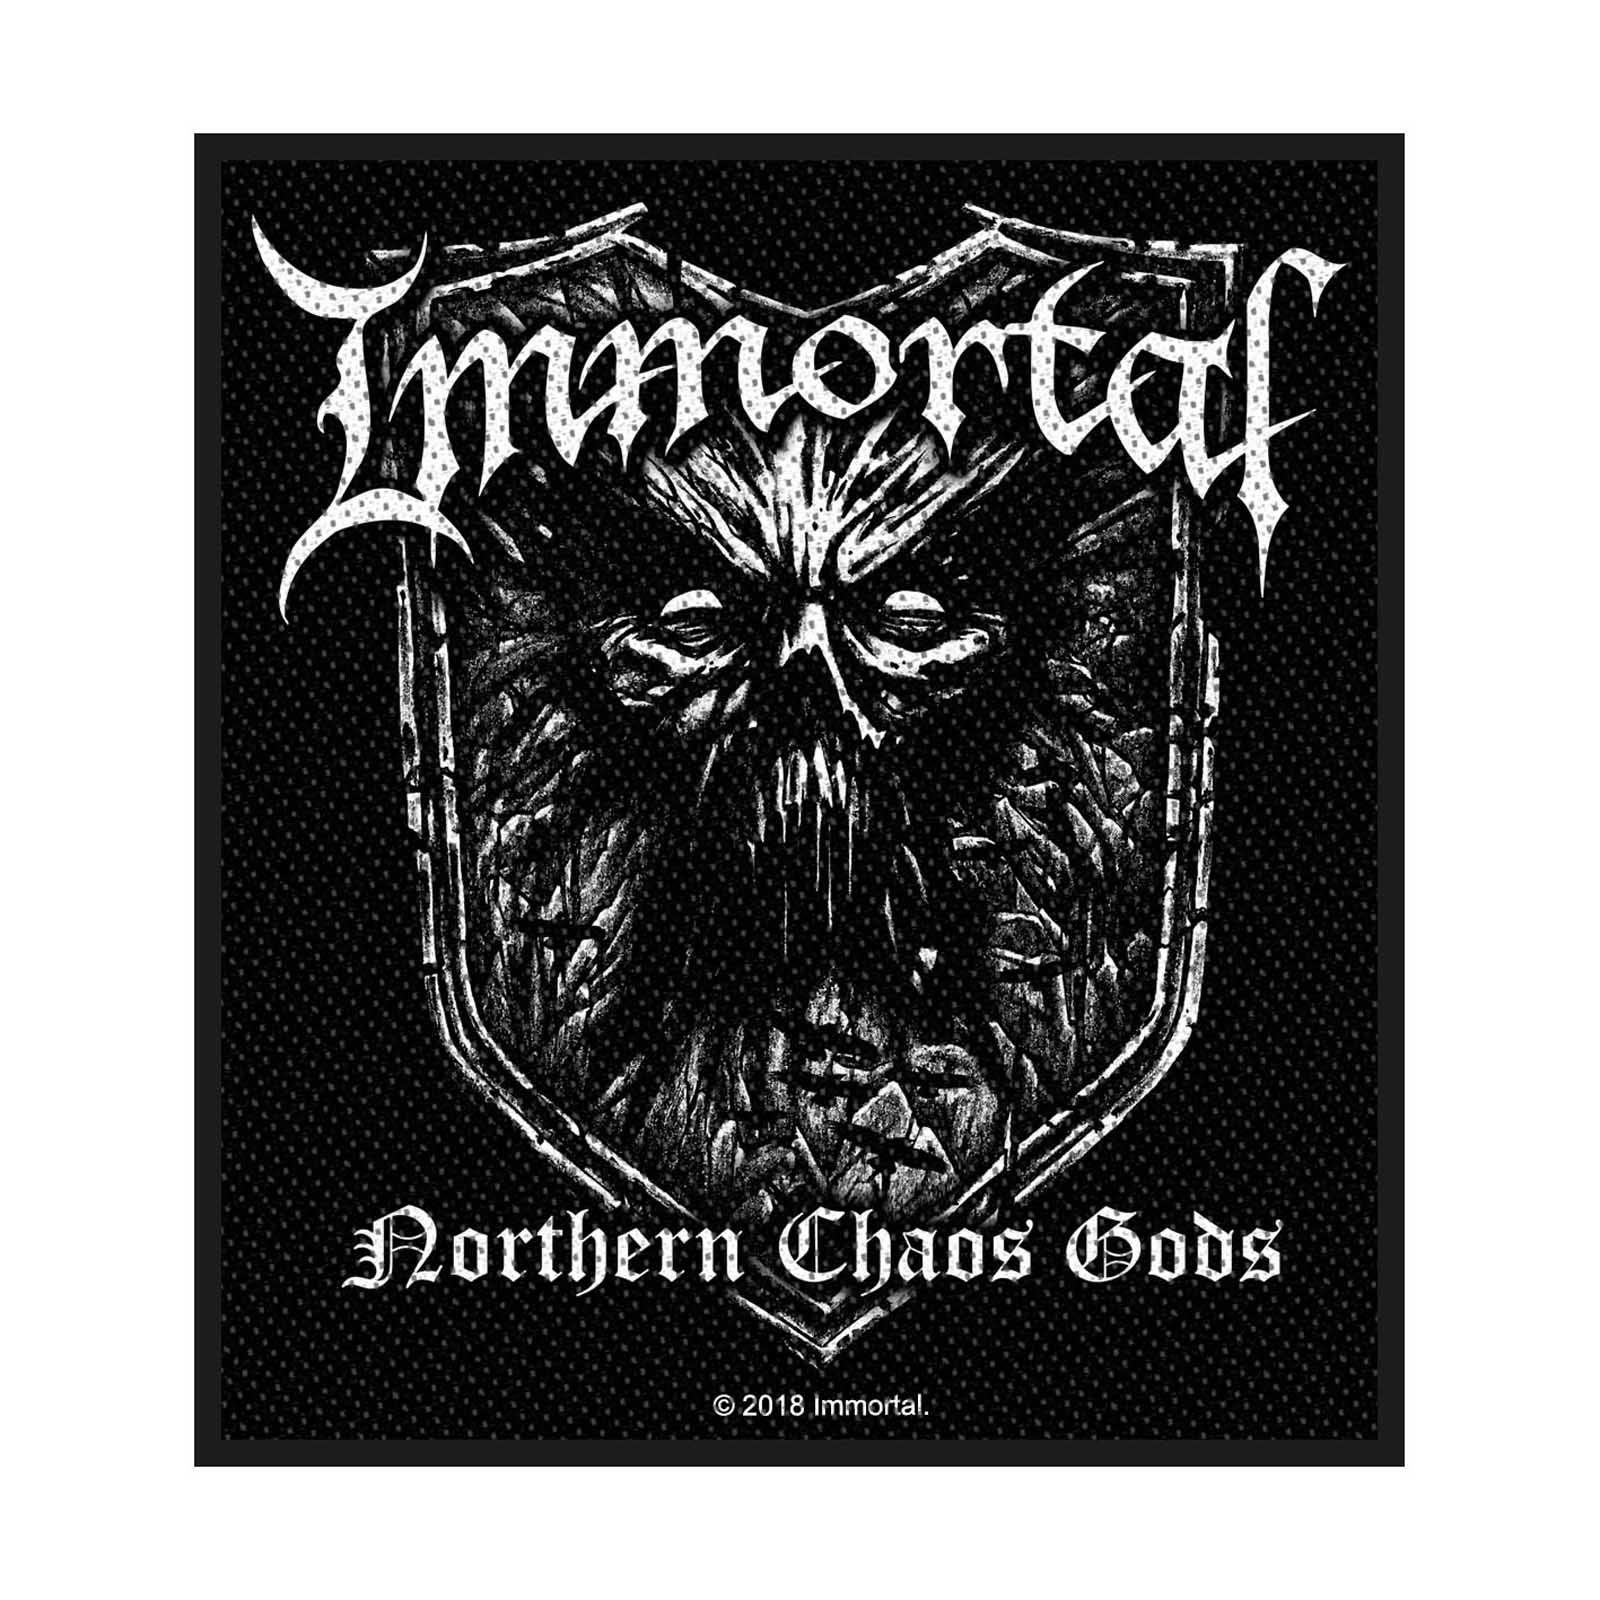 Patch Immortal Northern Chaos Gods